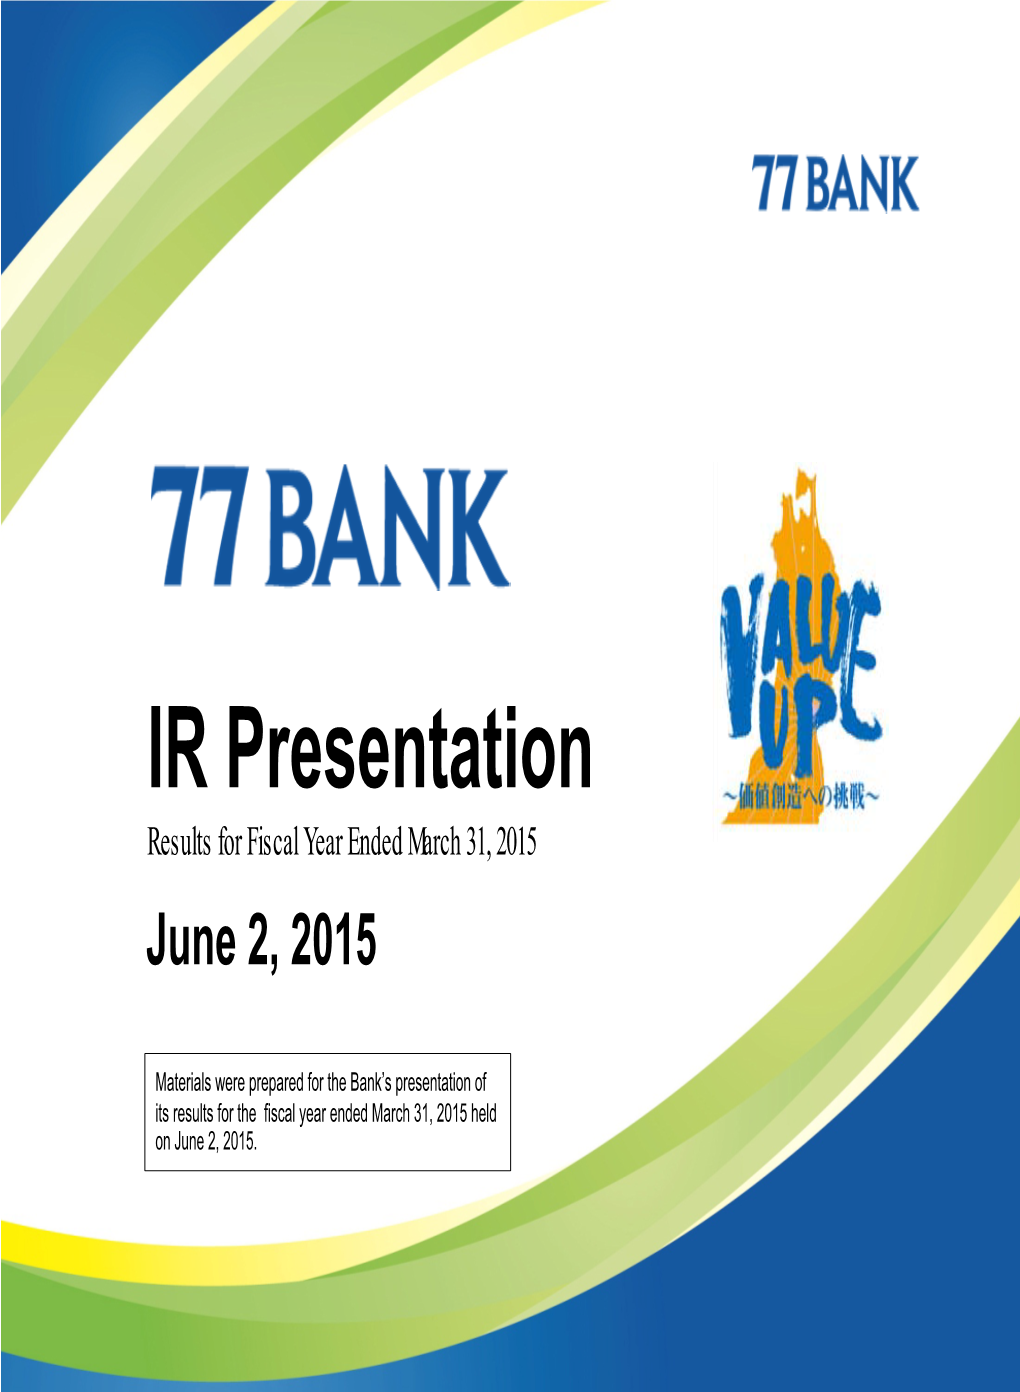 IR Presentation Results for Fiscal Year Ended March 31, 2015 June 2, 2015